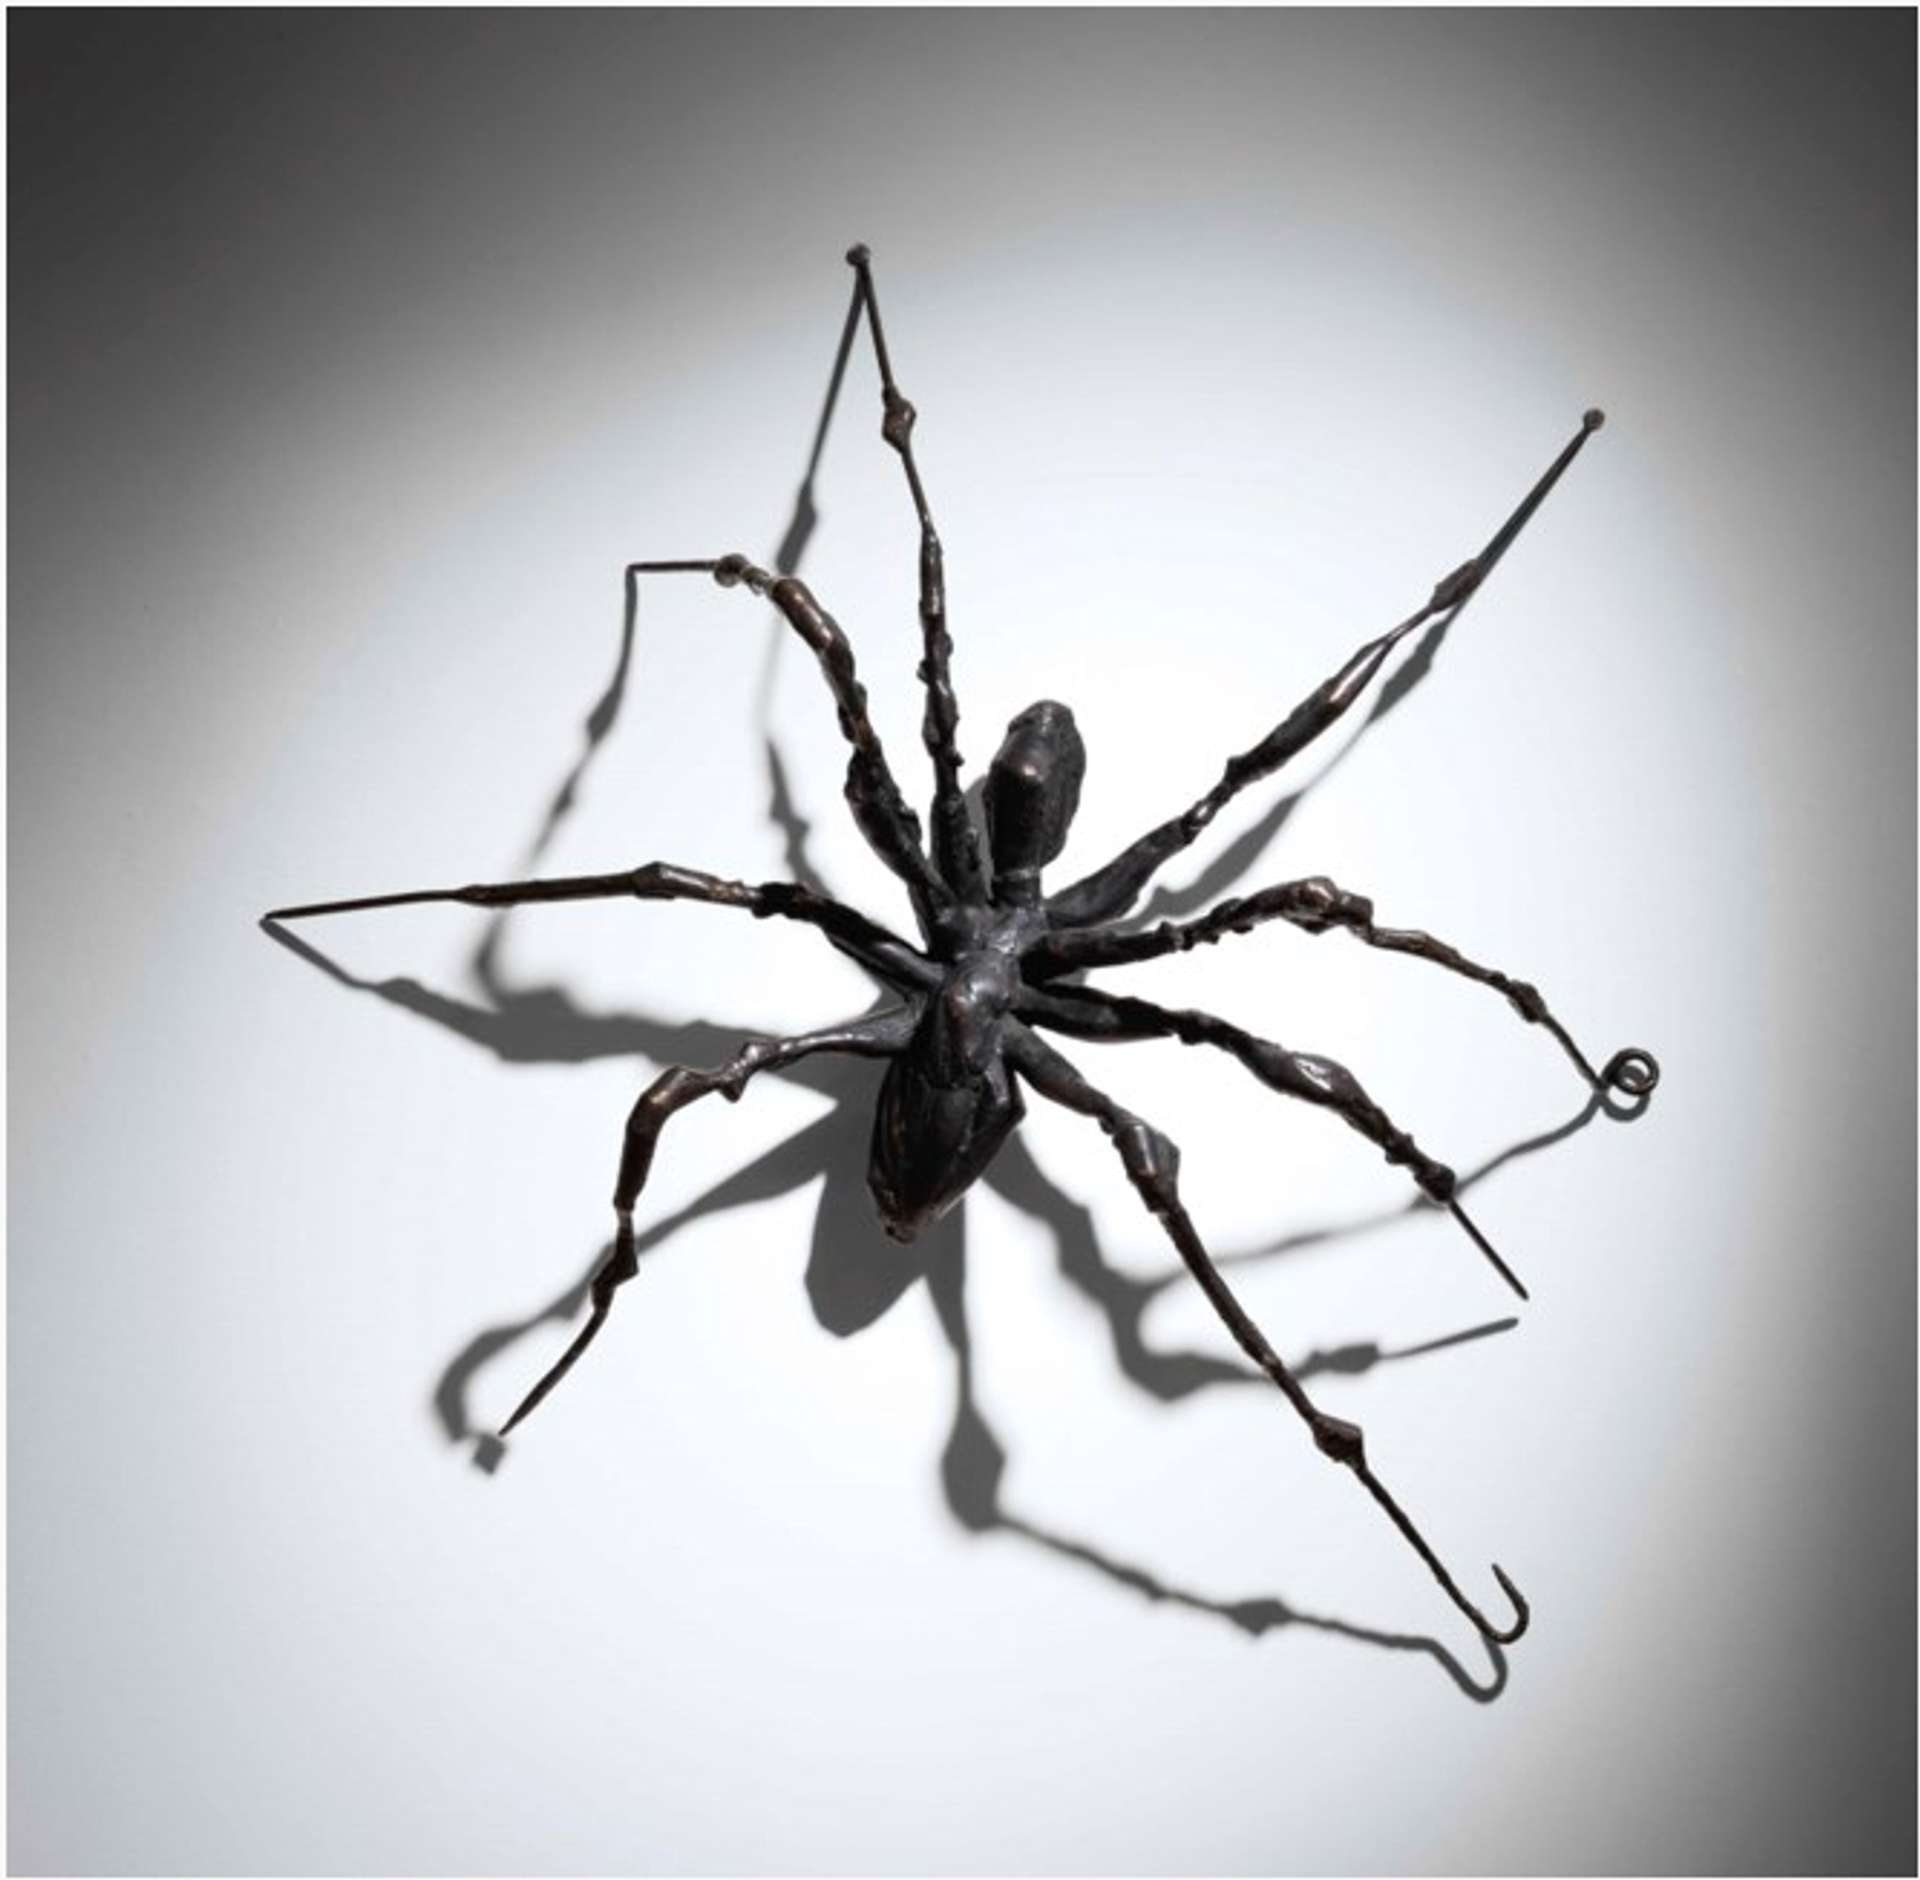 A wall relief spider sculpture climbing upwards with a slight tilt, showcasing a dynamic movement. Its eight legs are evenly balanced on the surface.